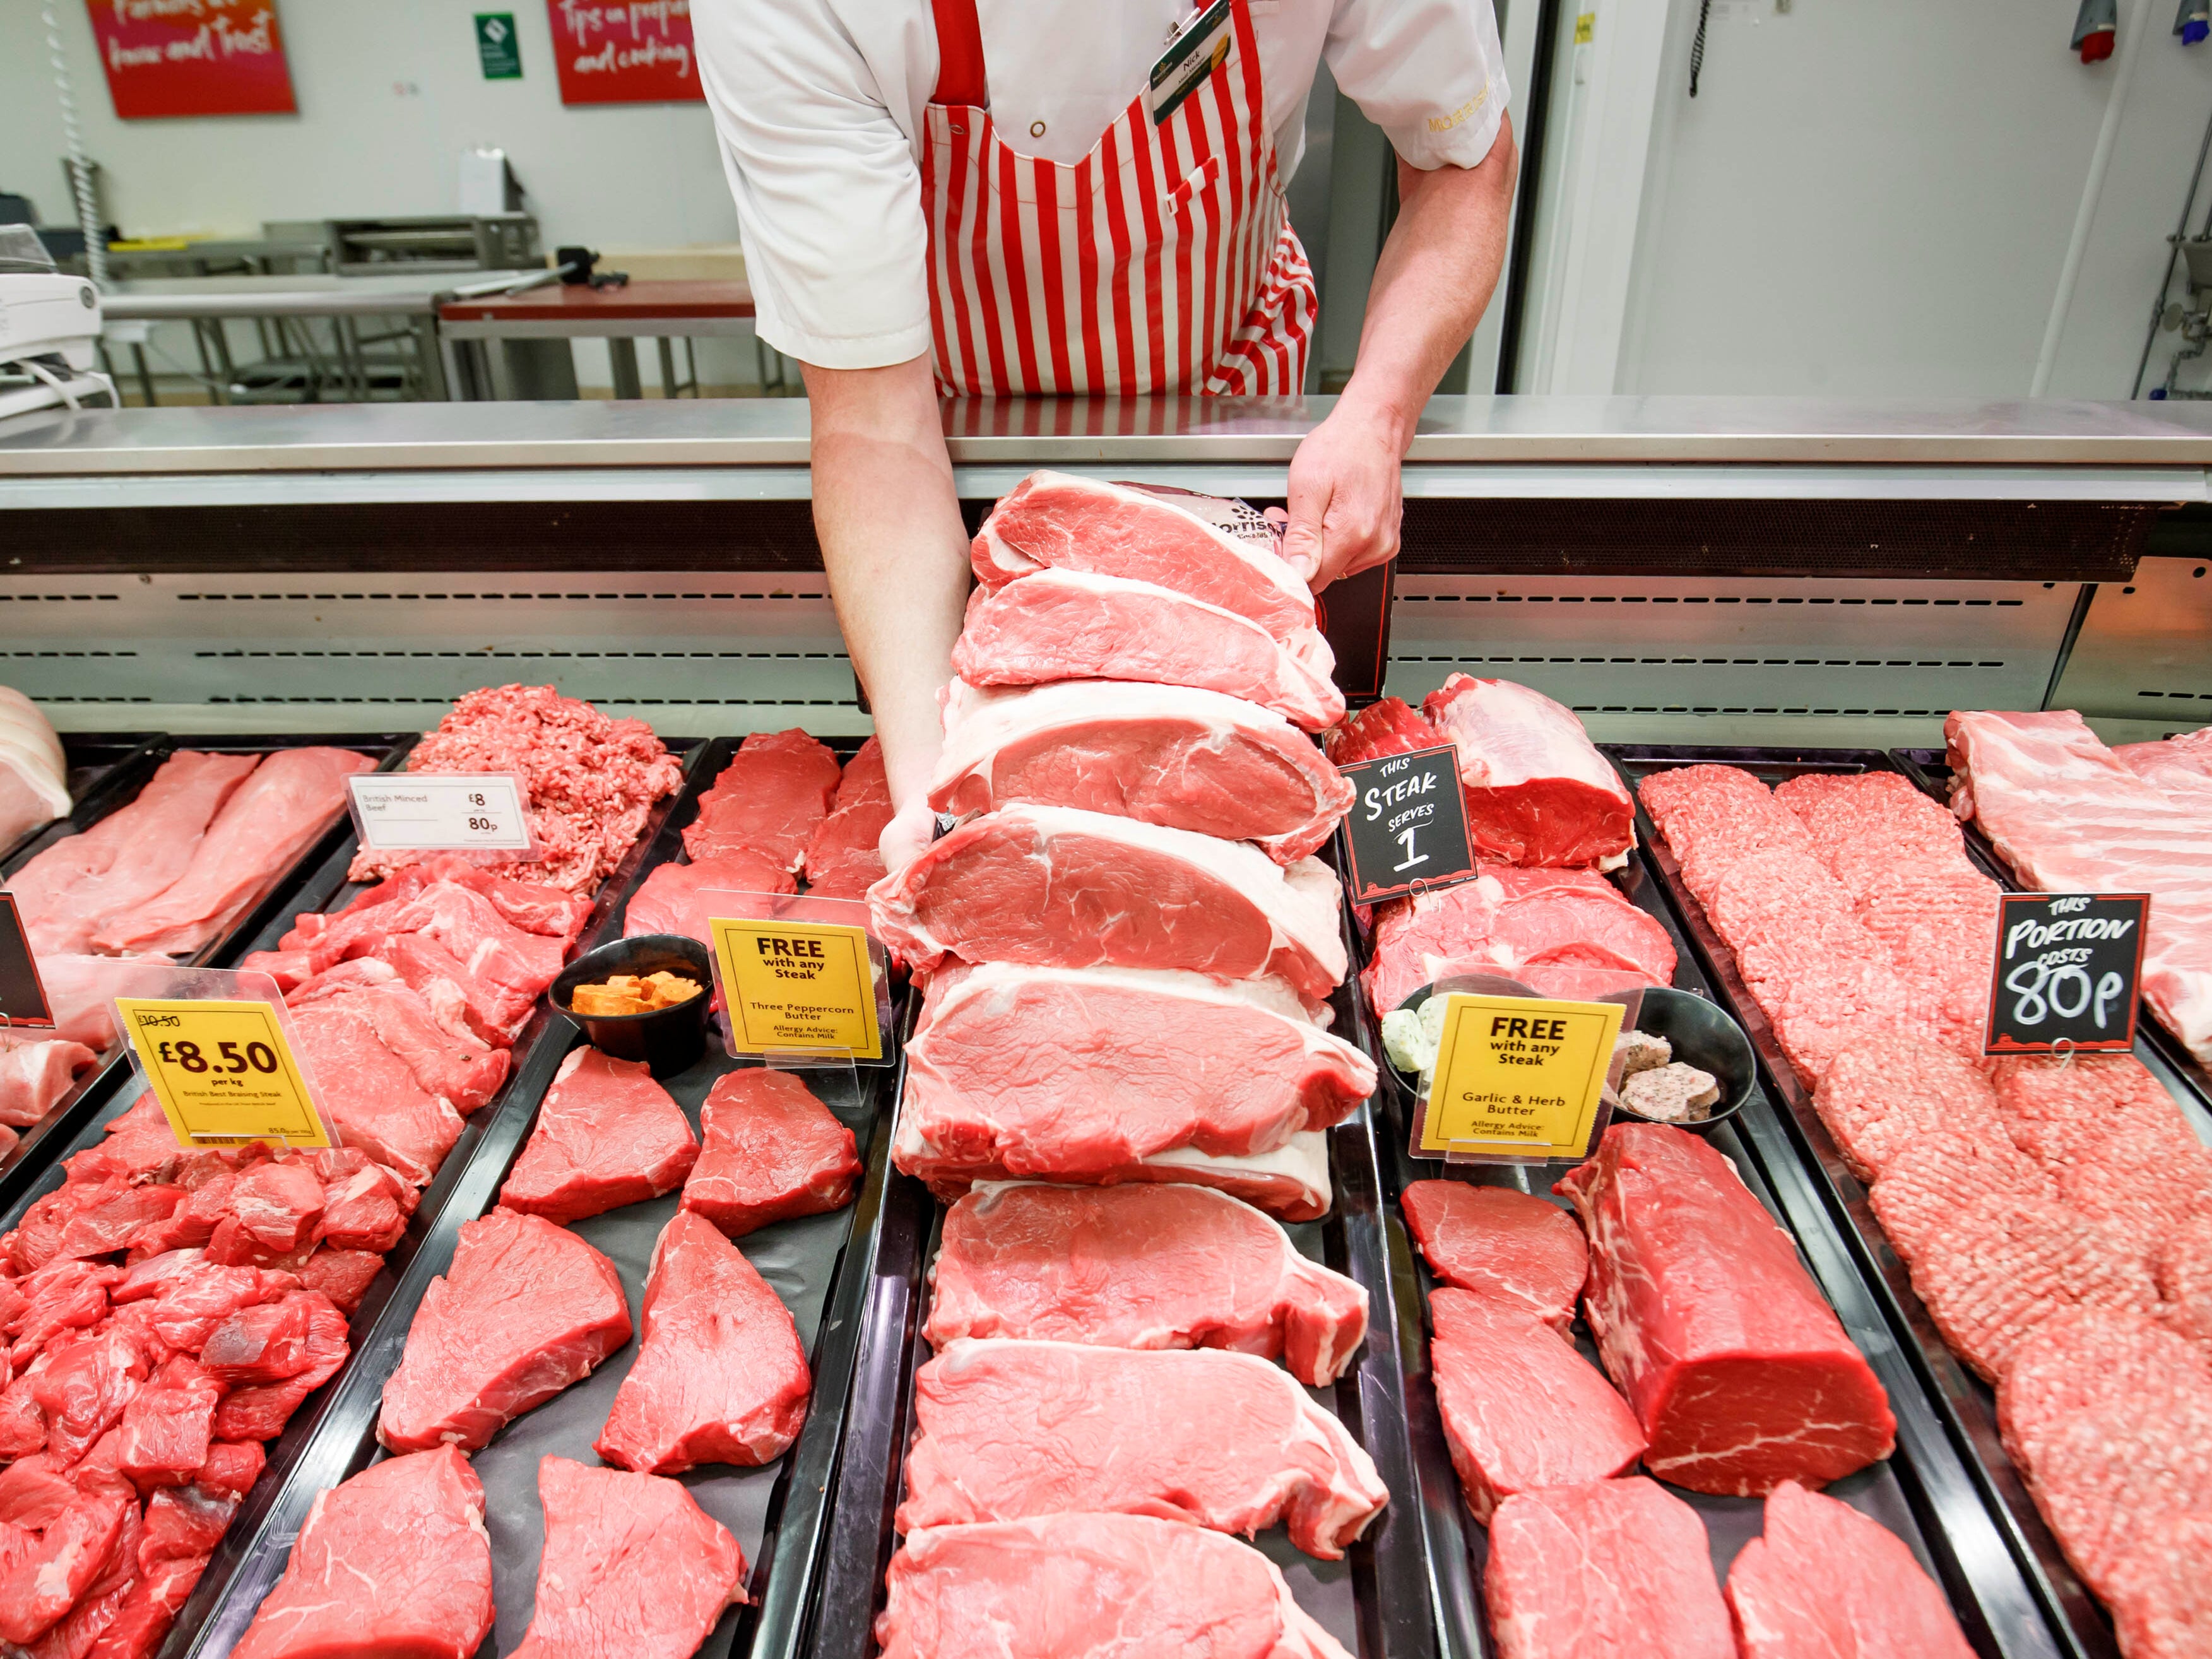 British beef exported to EU before it is butchered and re-imported for sale in UK supermarkets